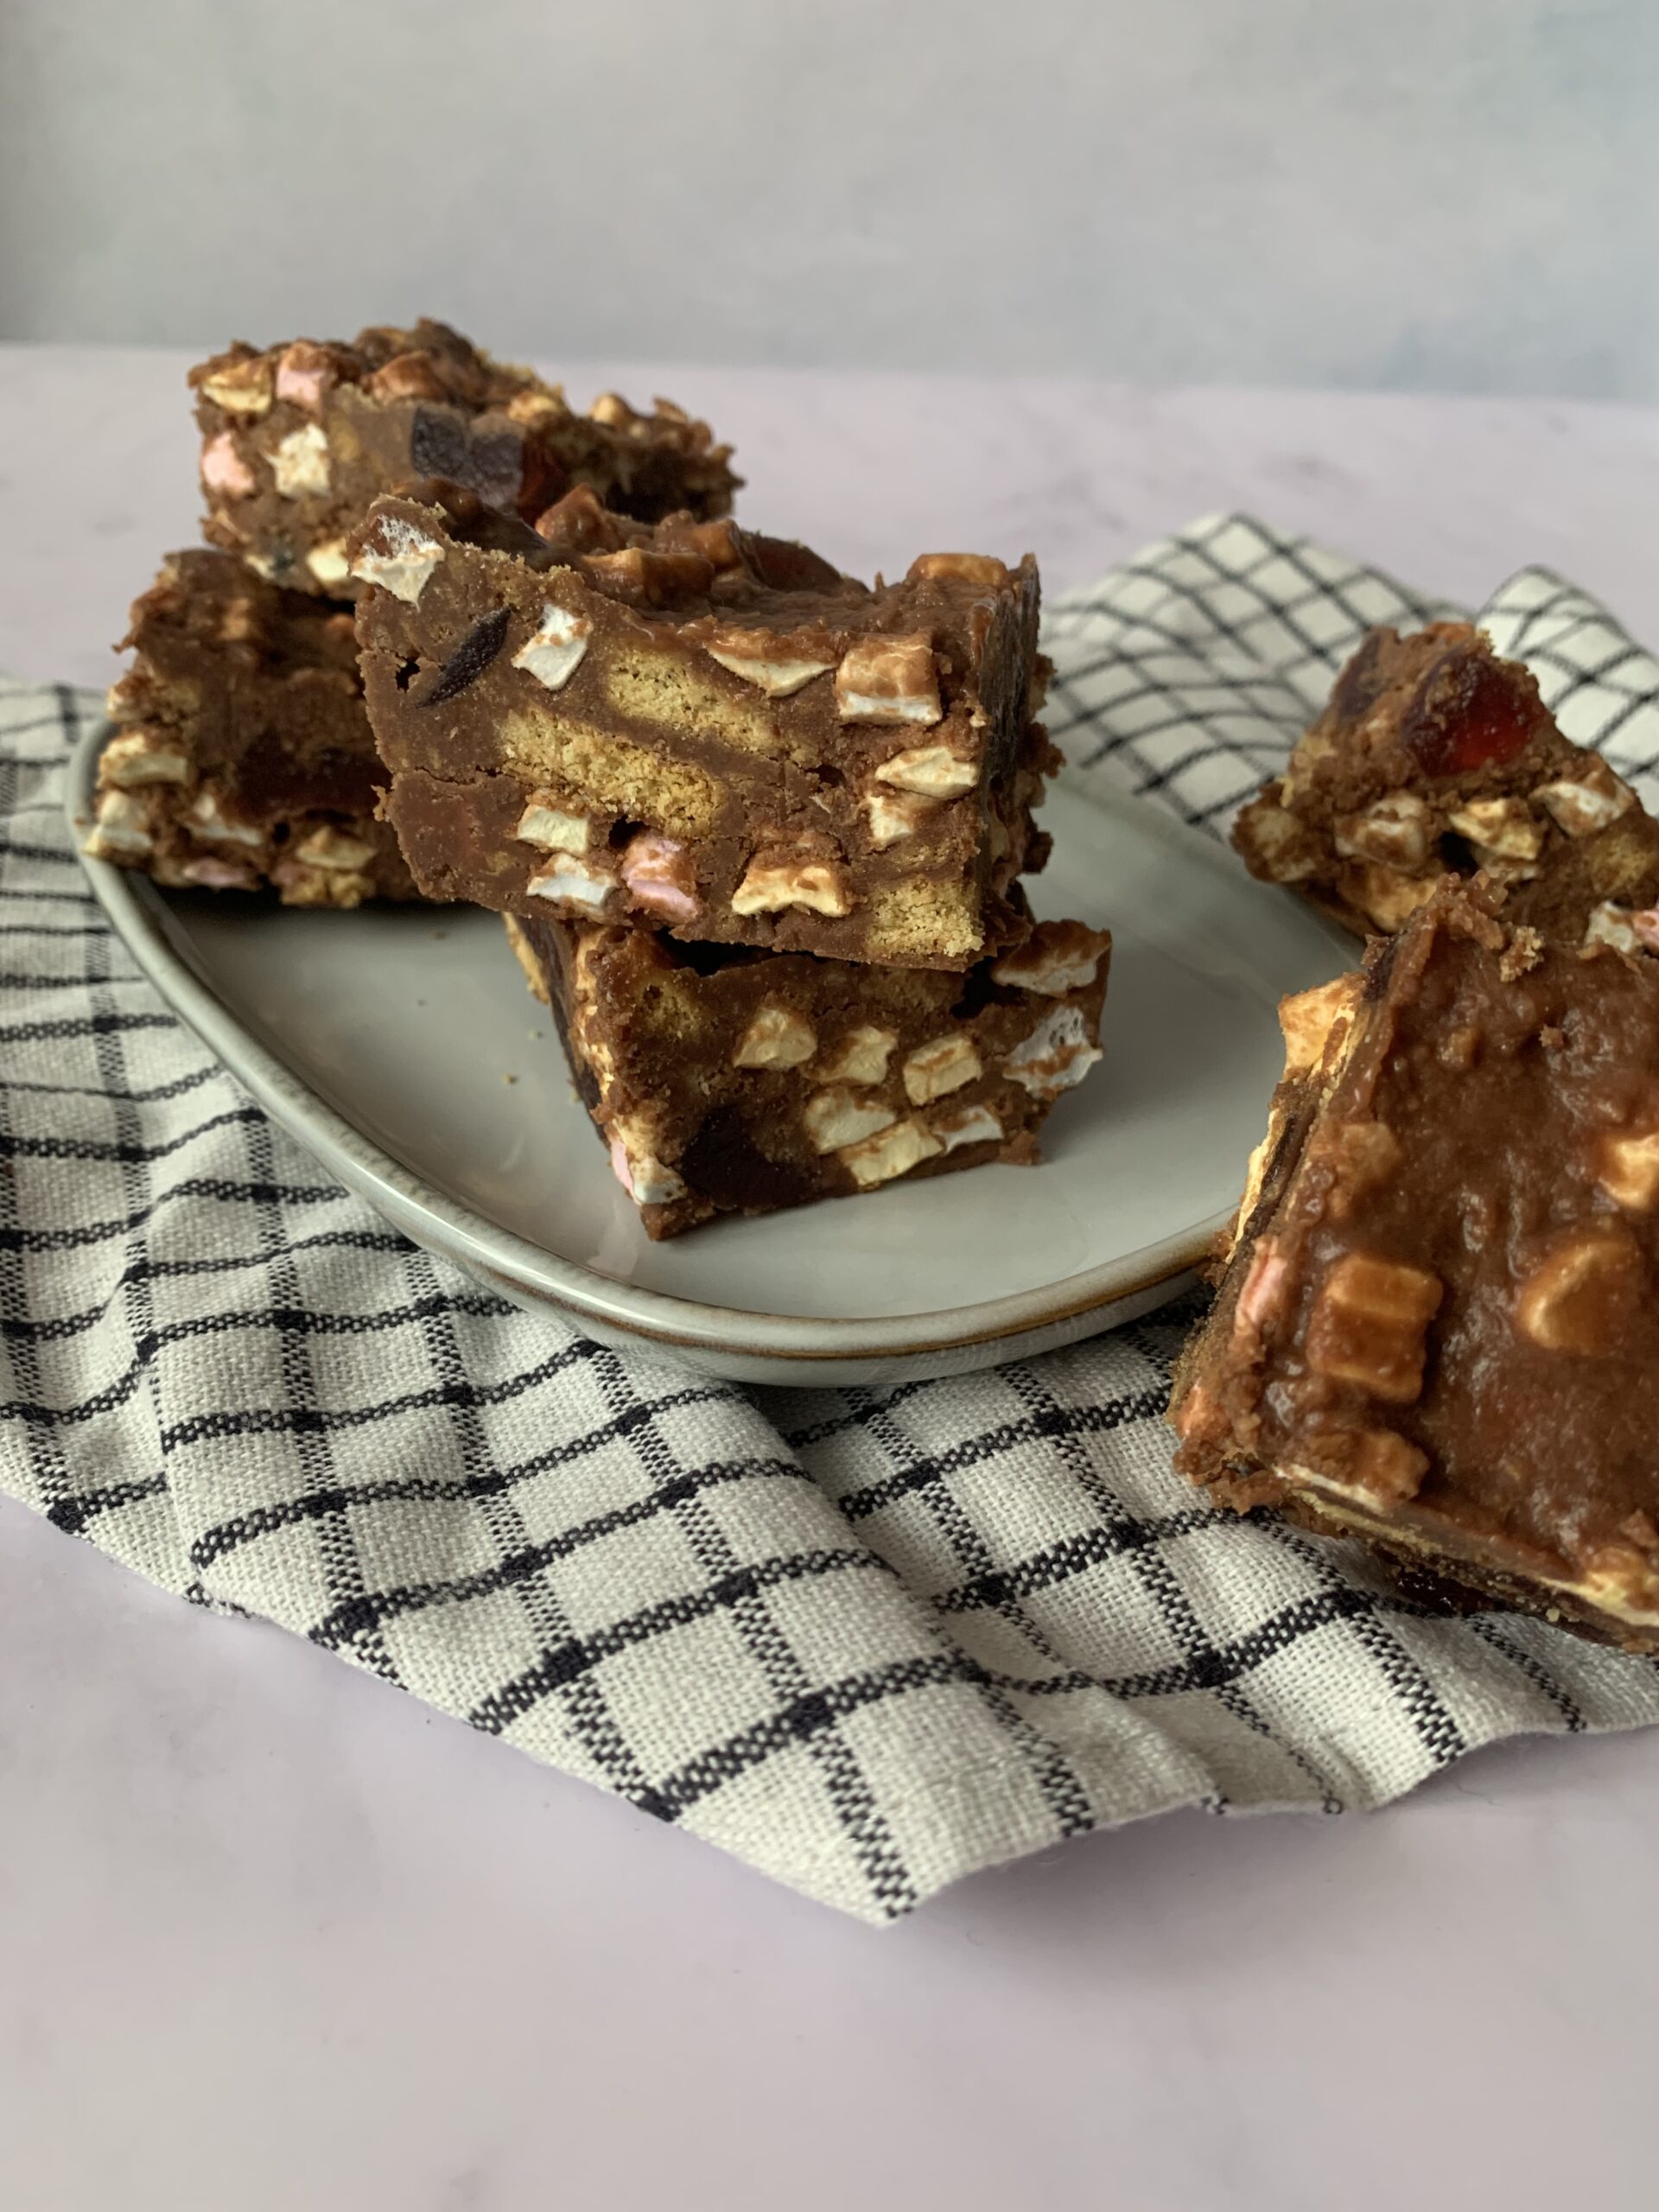 The best rocky road recipe you will find!